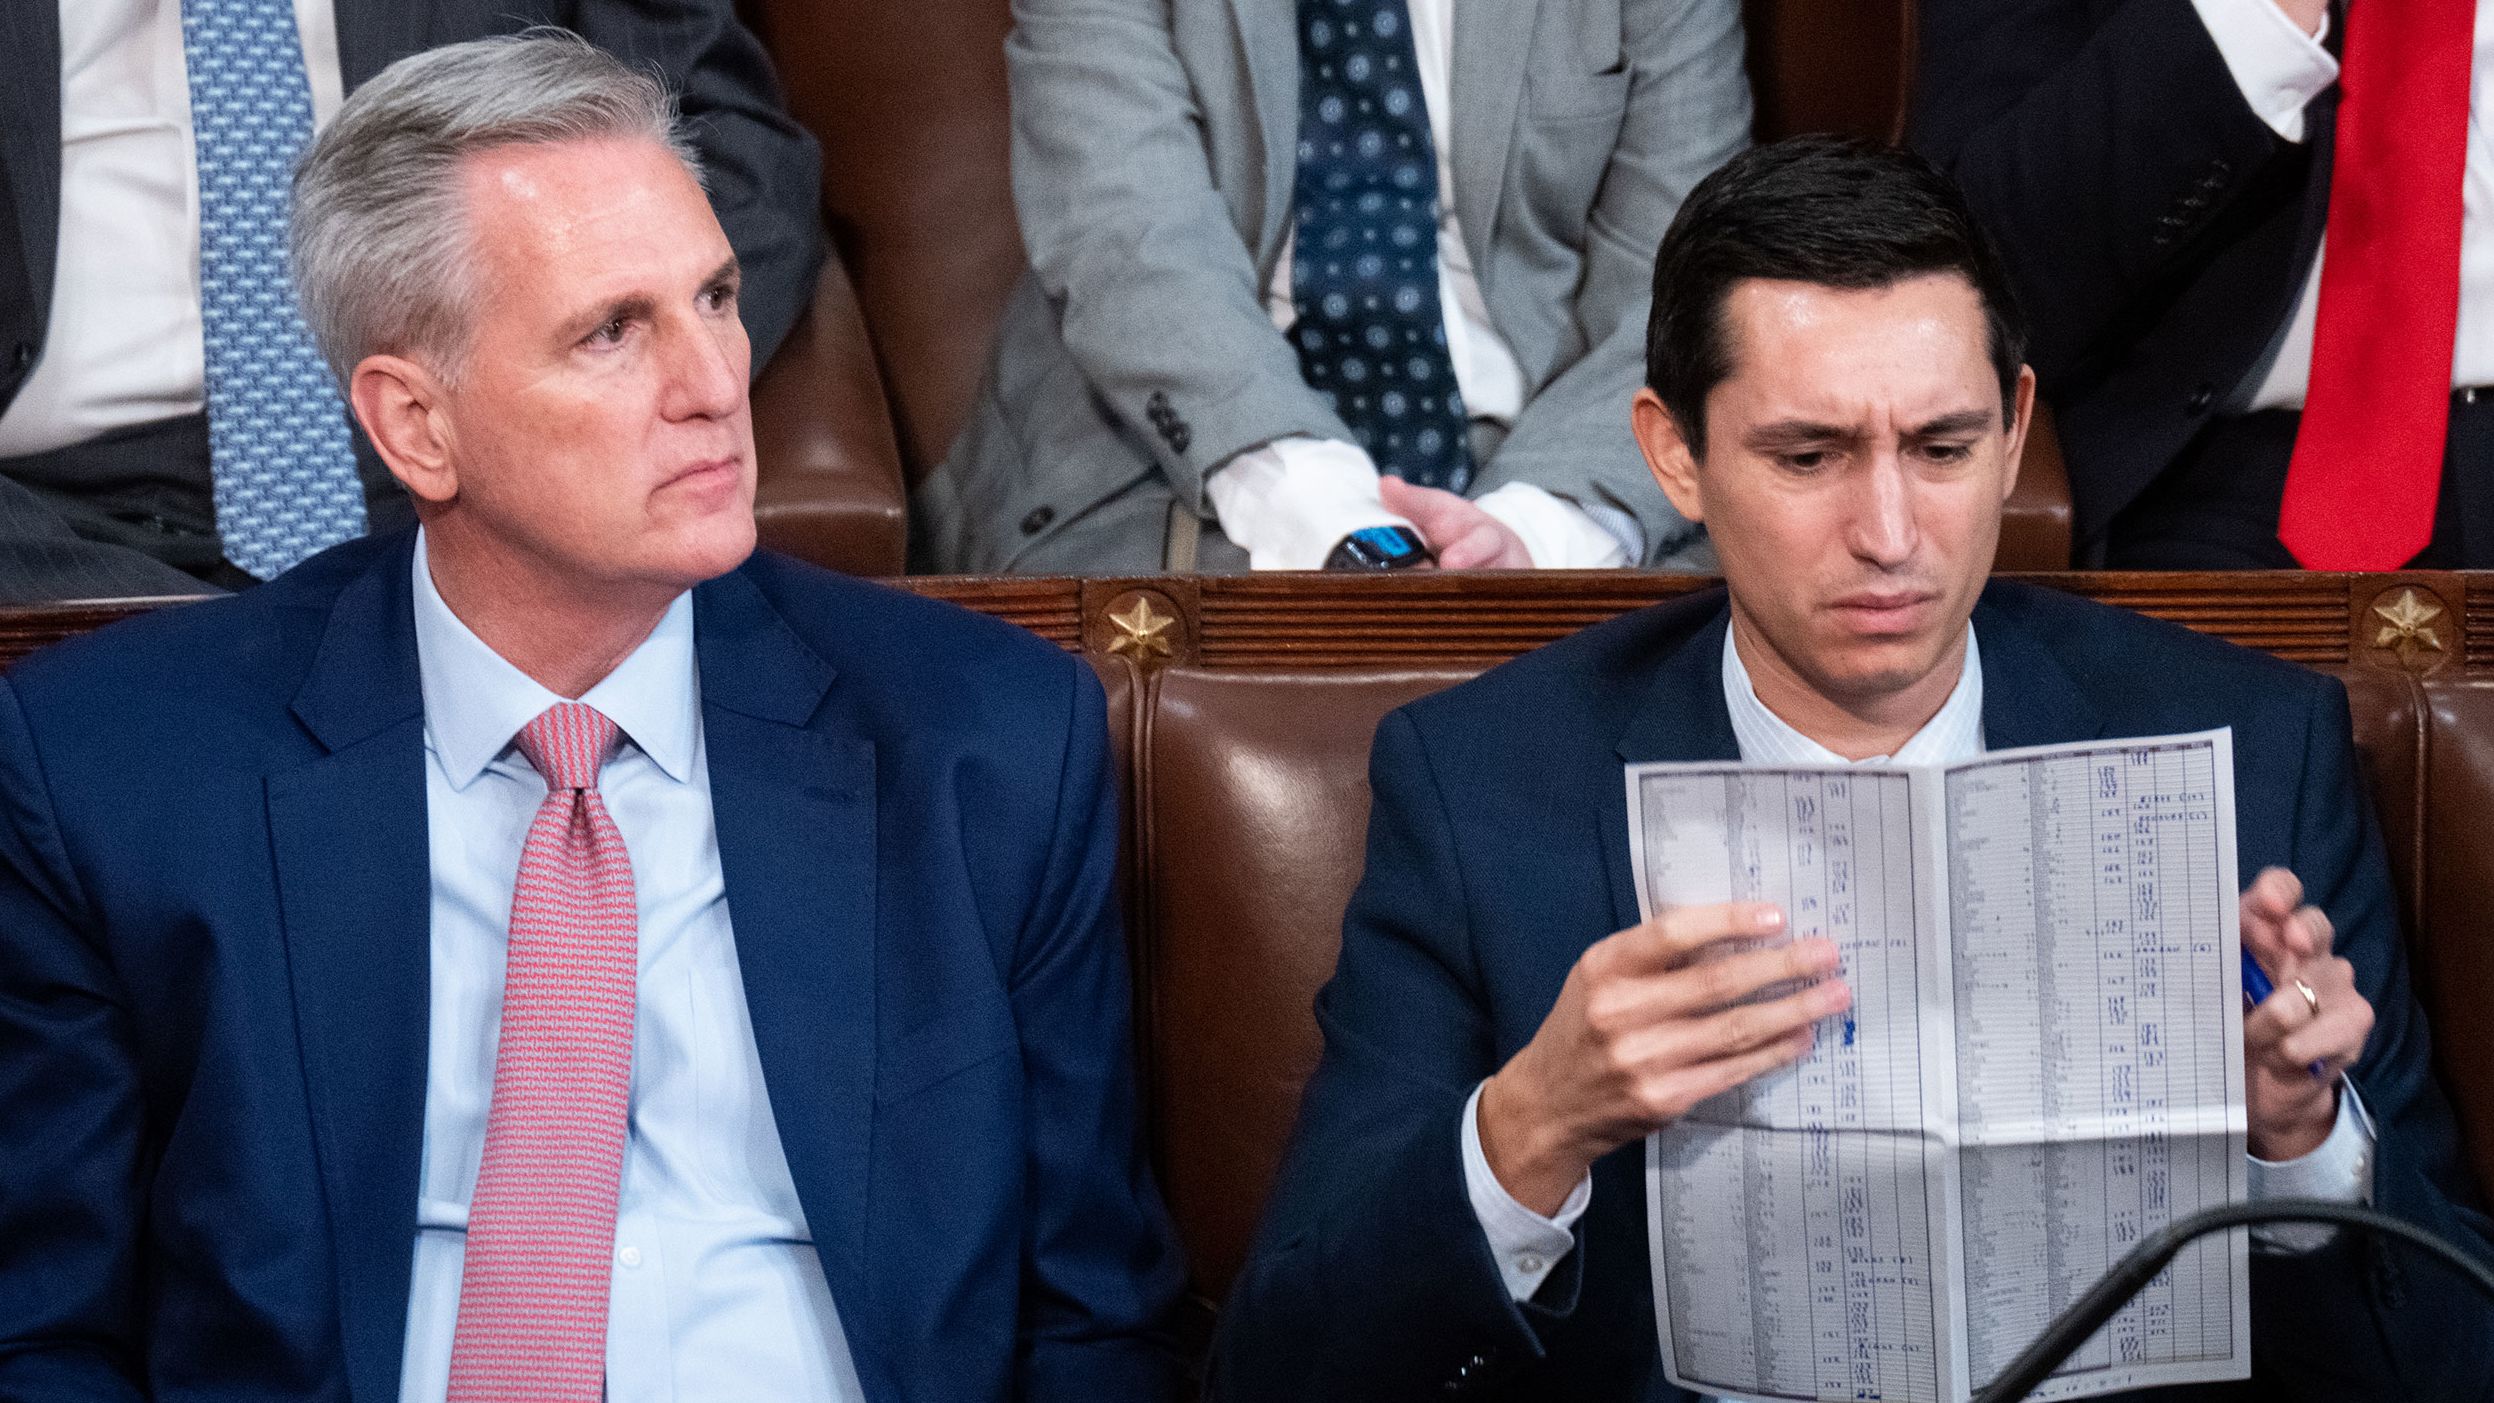 McCarthy and an aide wait for a final tally of votes as the House meets to elect a new speaker in January 2023. McCarthy lost 14 votes over four days before he eventually secured the support he needed to win the speakership.